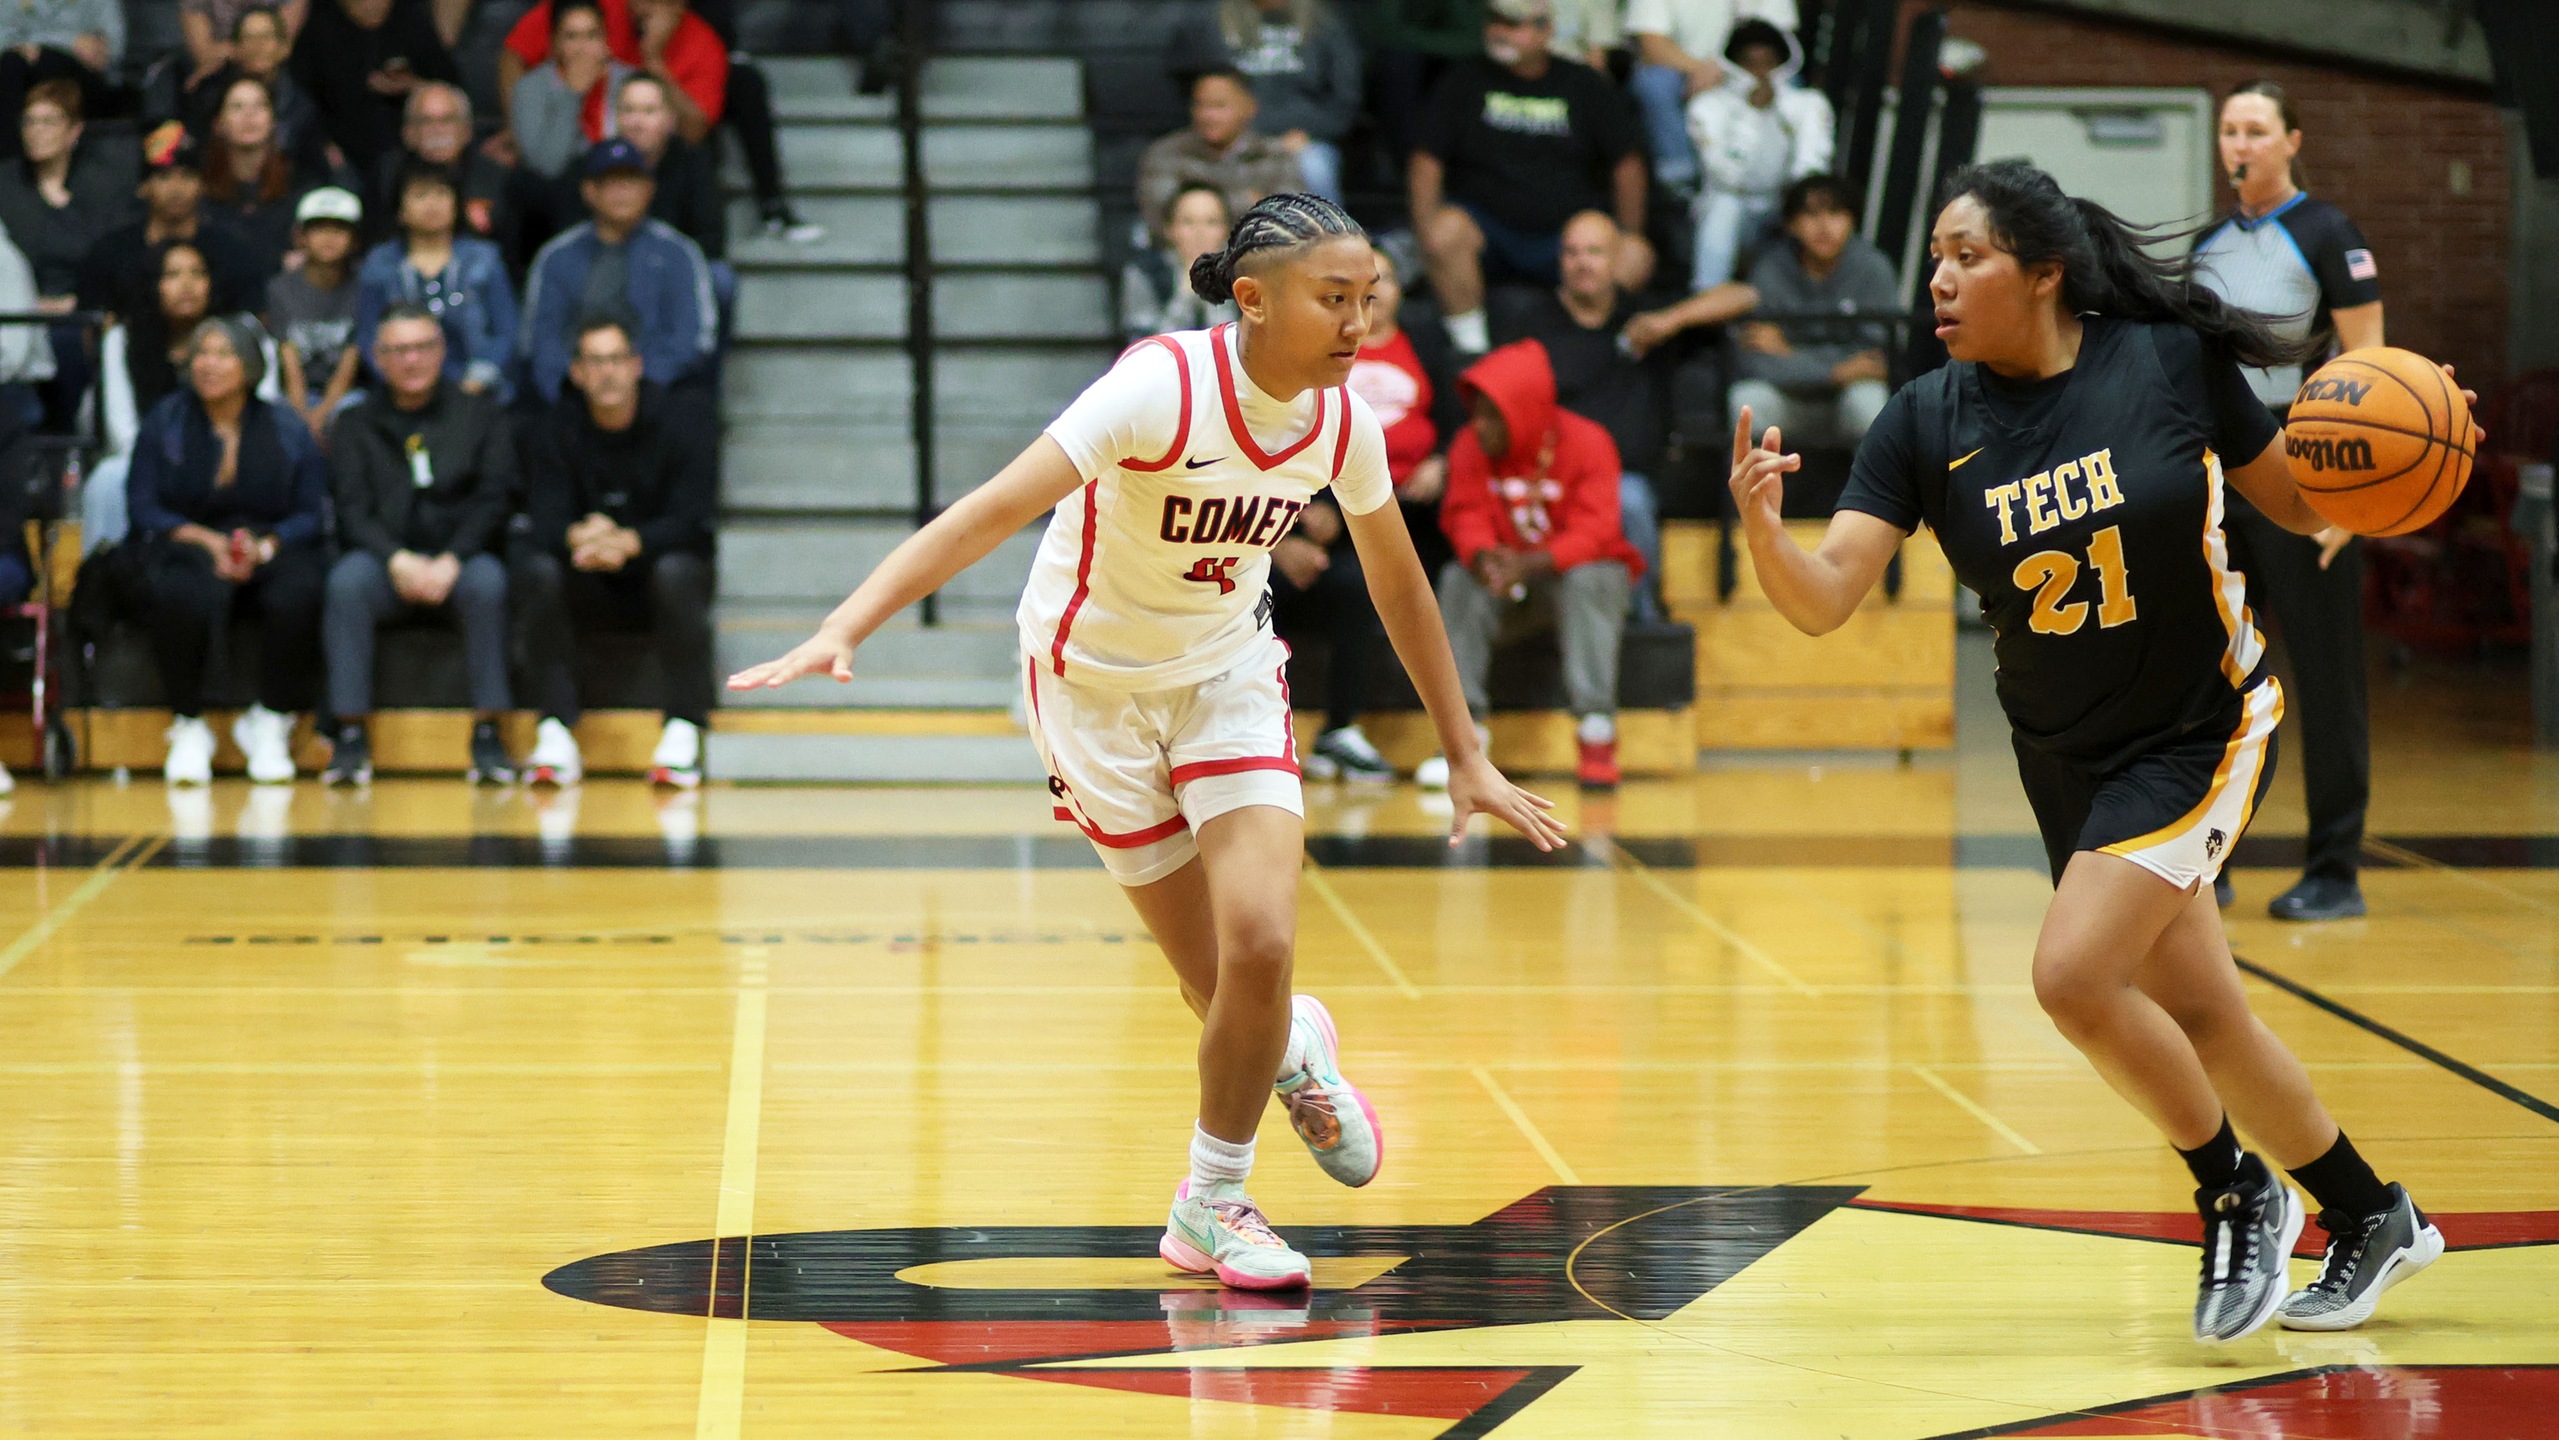 Angelina De Leon finished the night with 31 points. Photo by Hugh Cox.